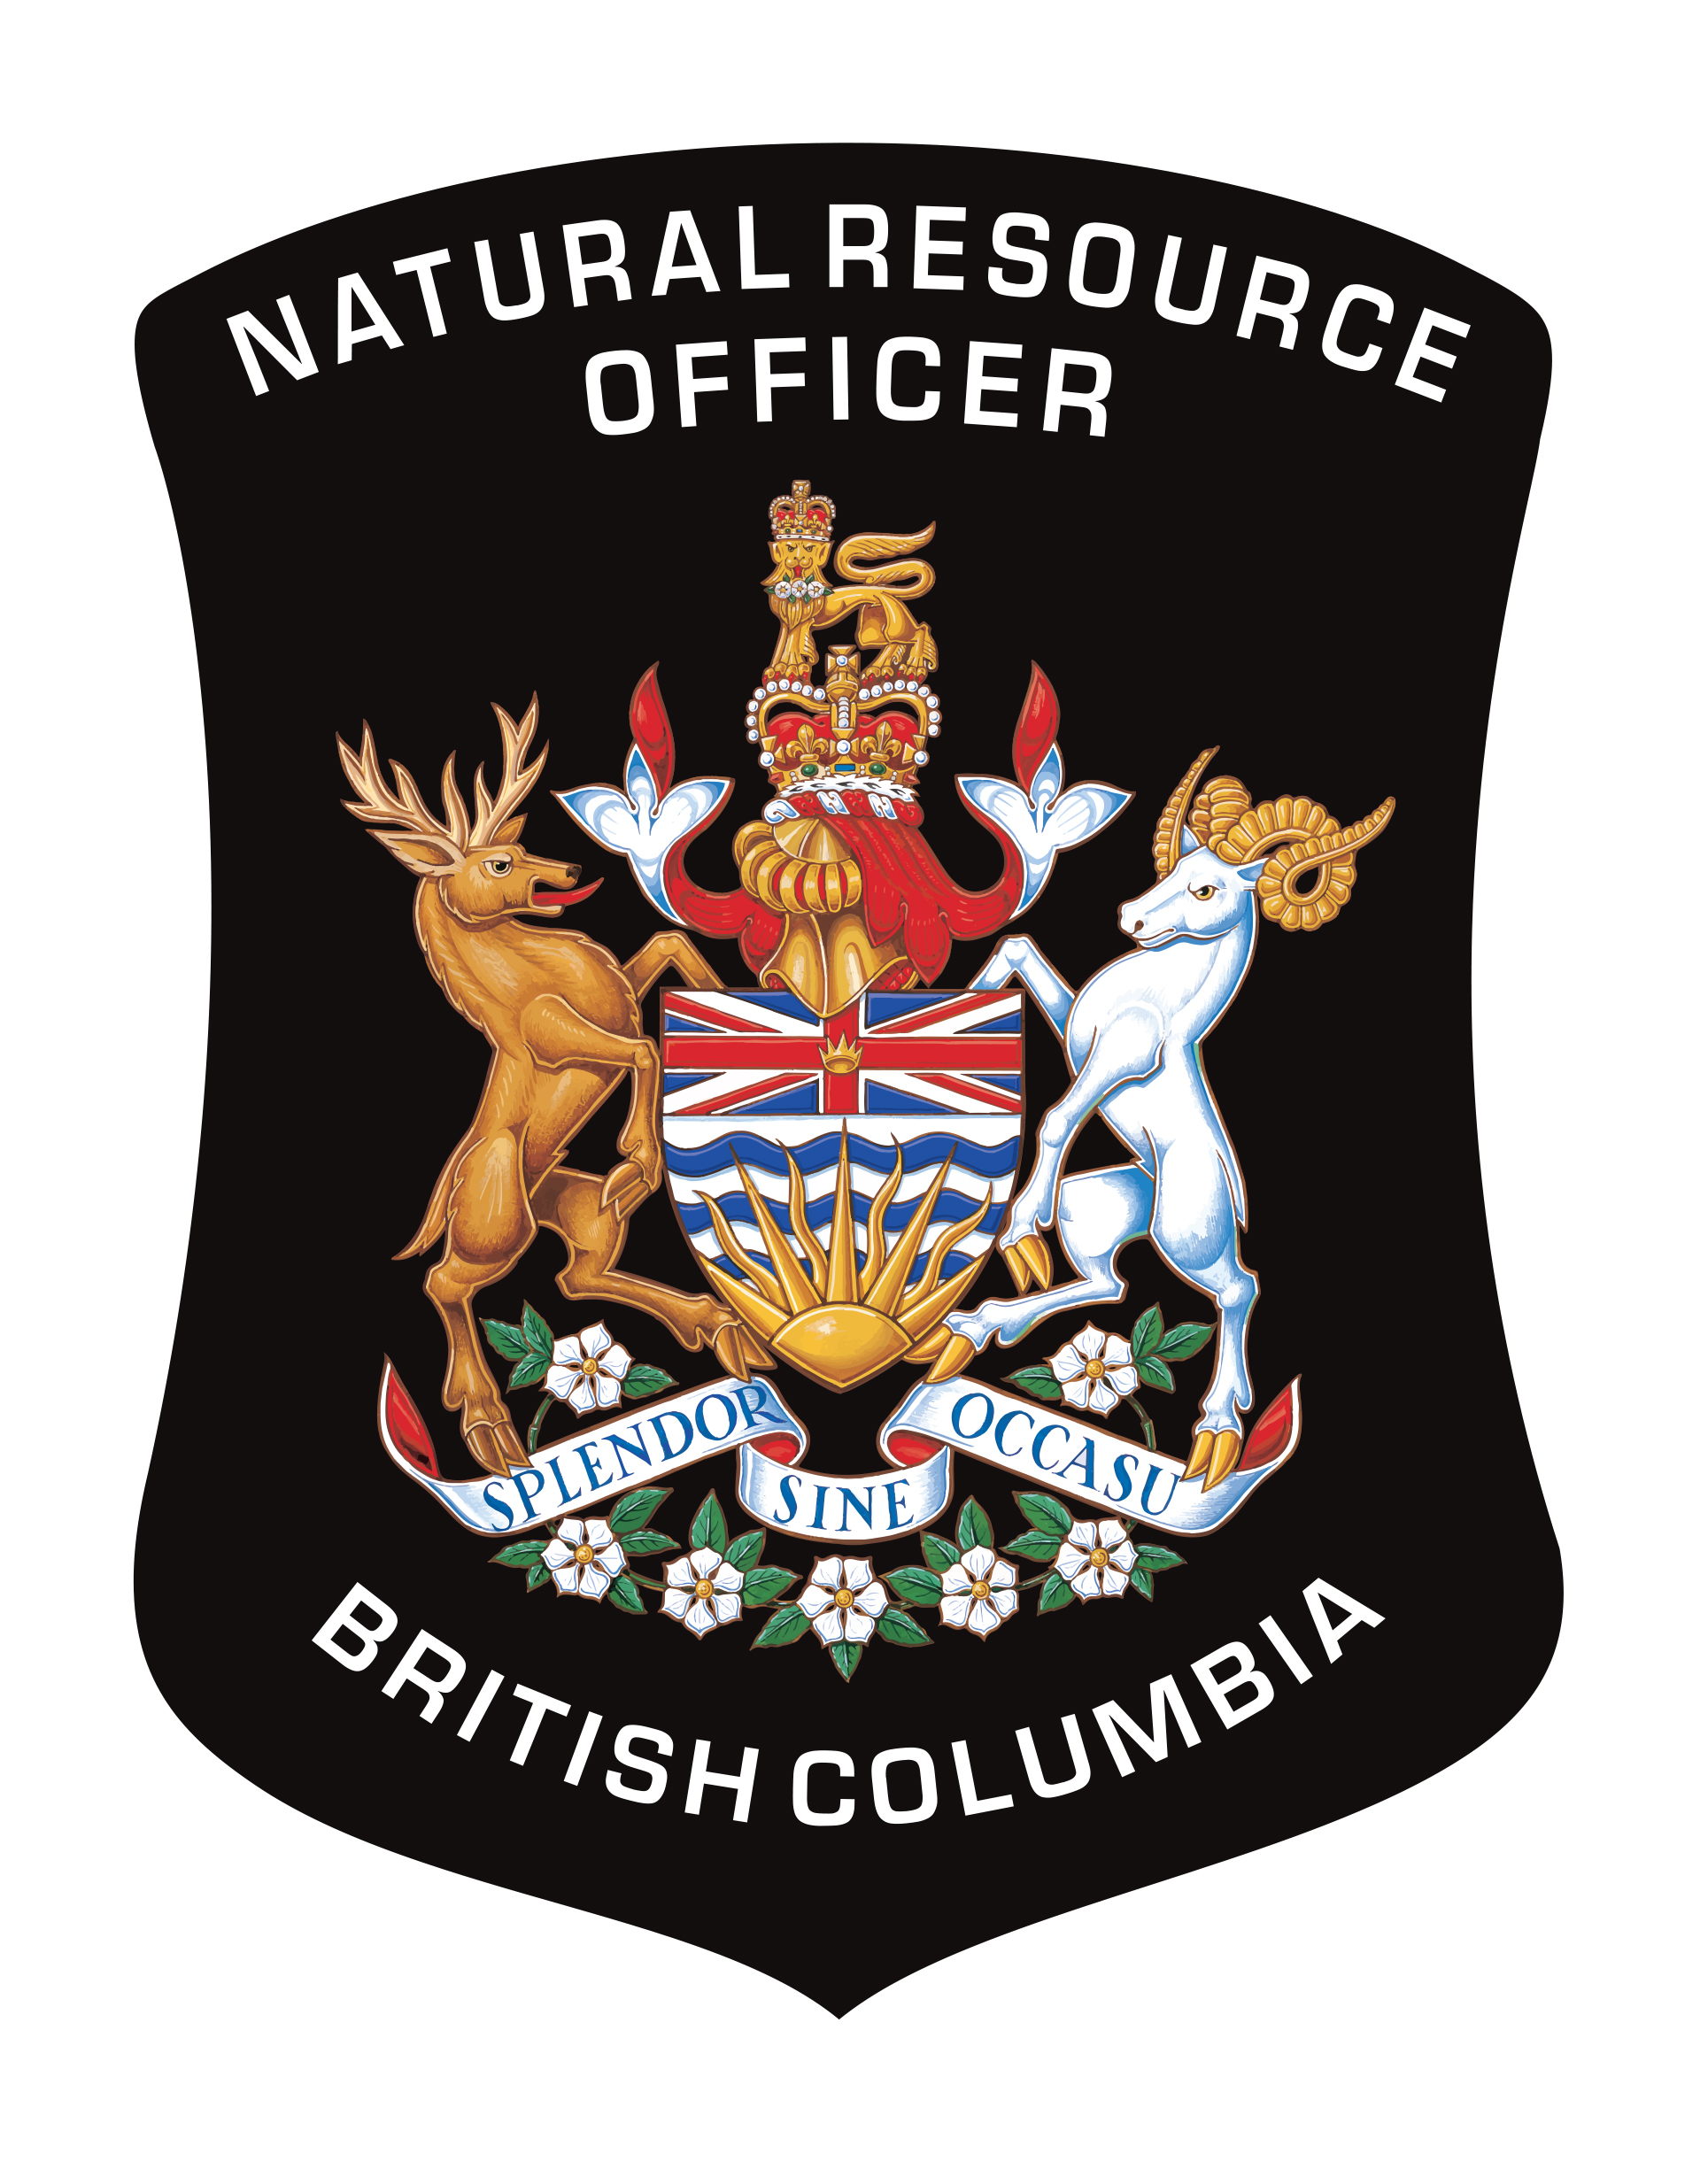 Natutral Resource Officers insignia